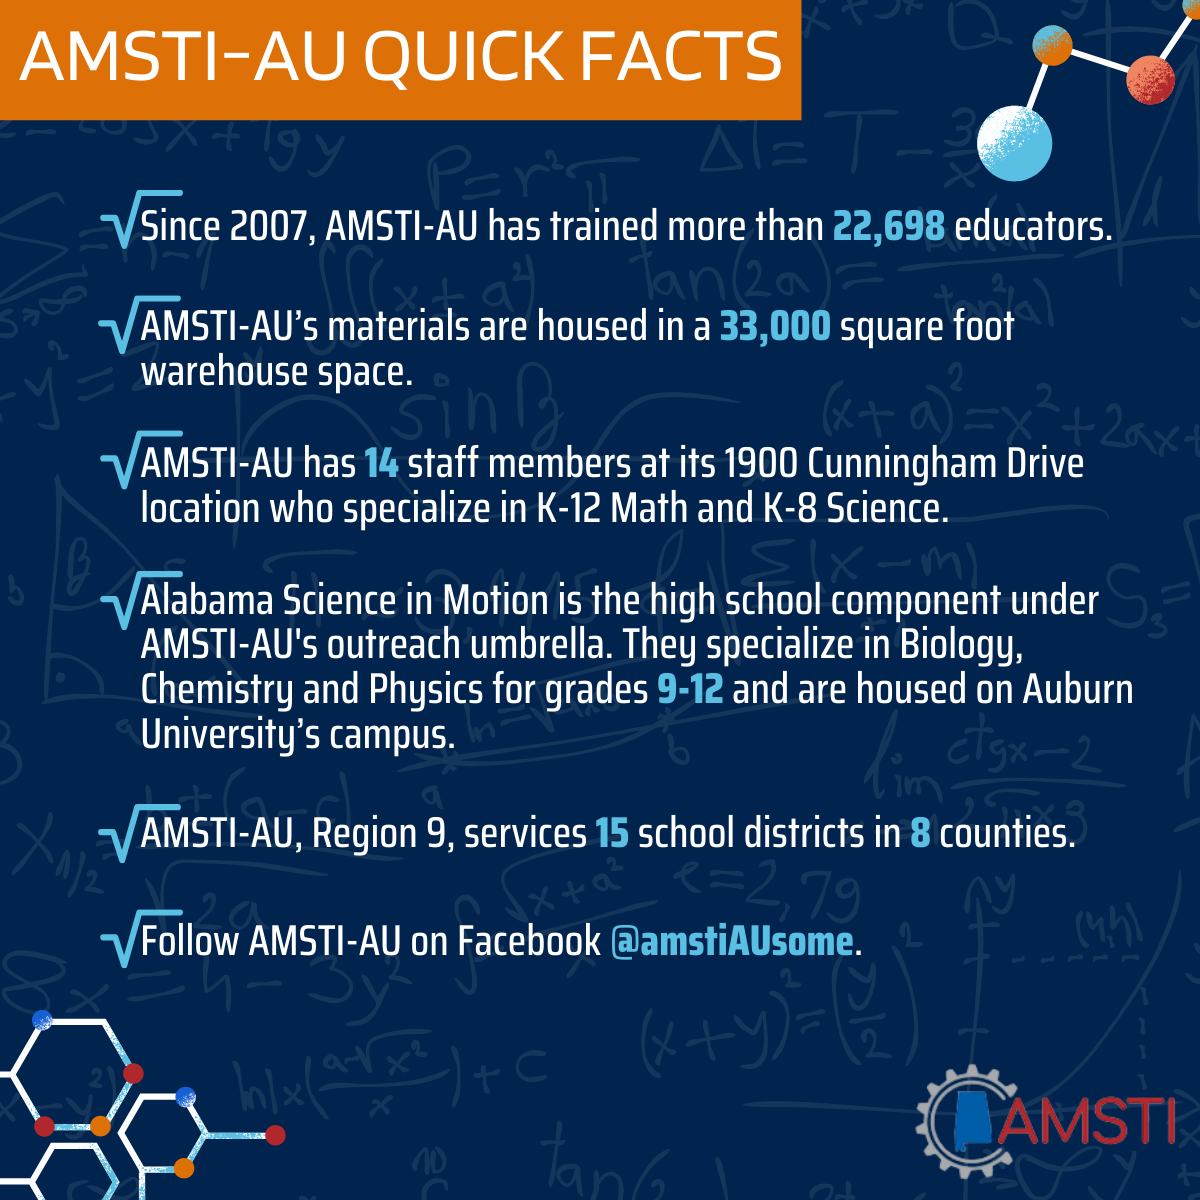 Facts about AMSTI